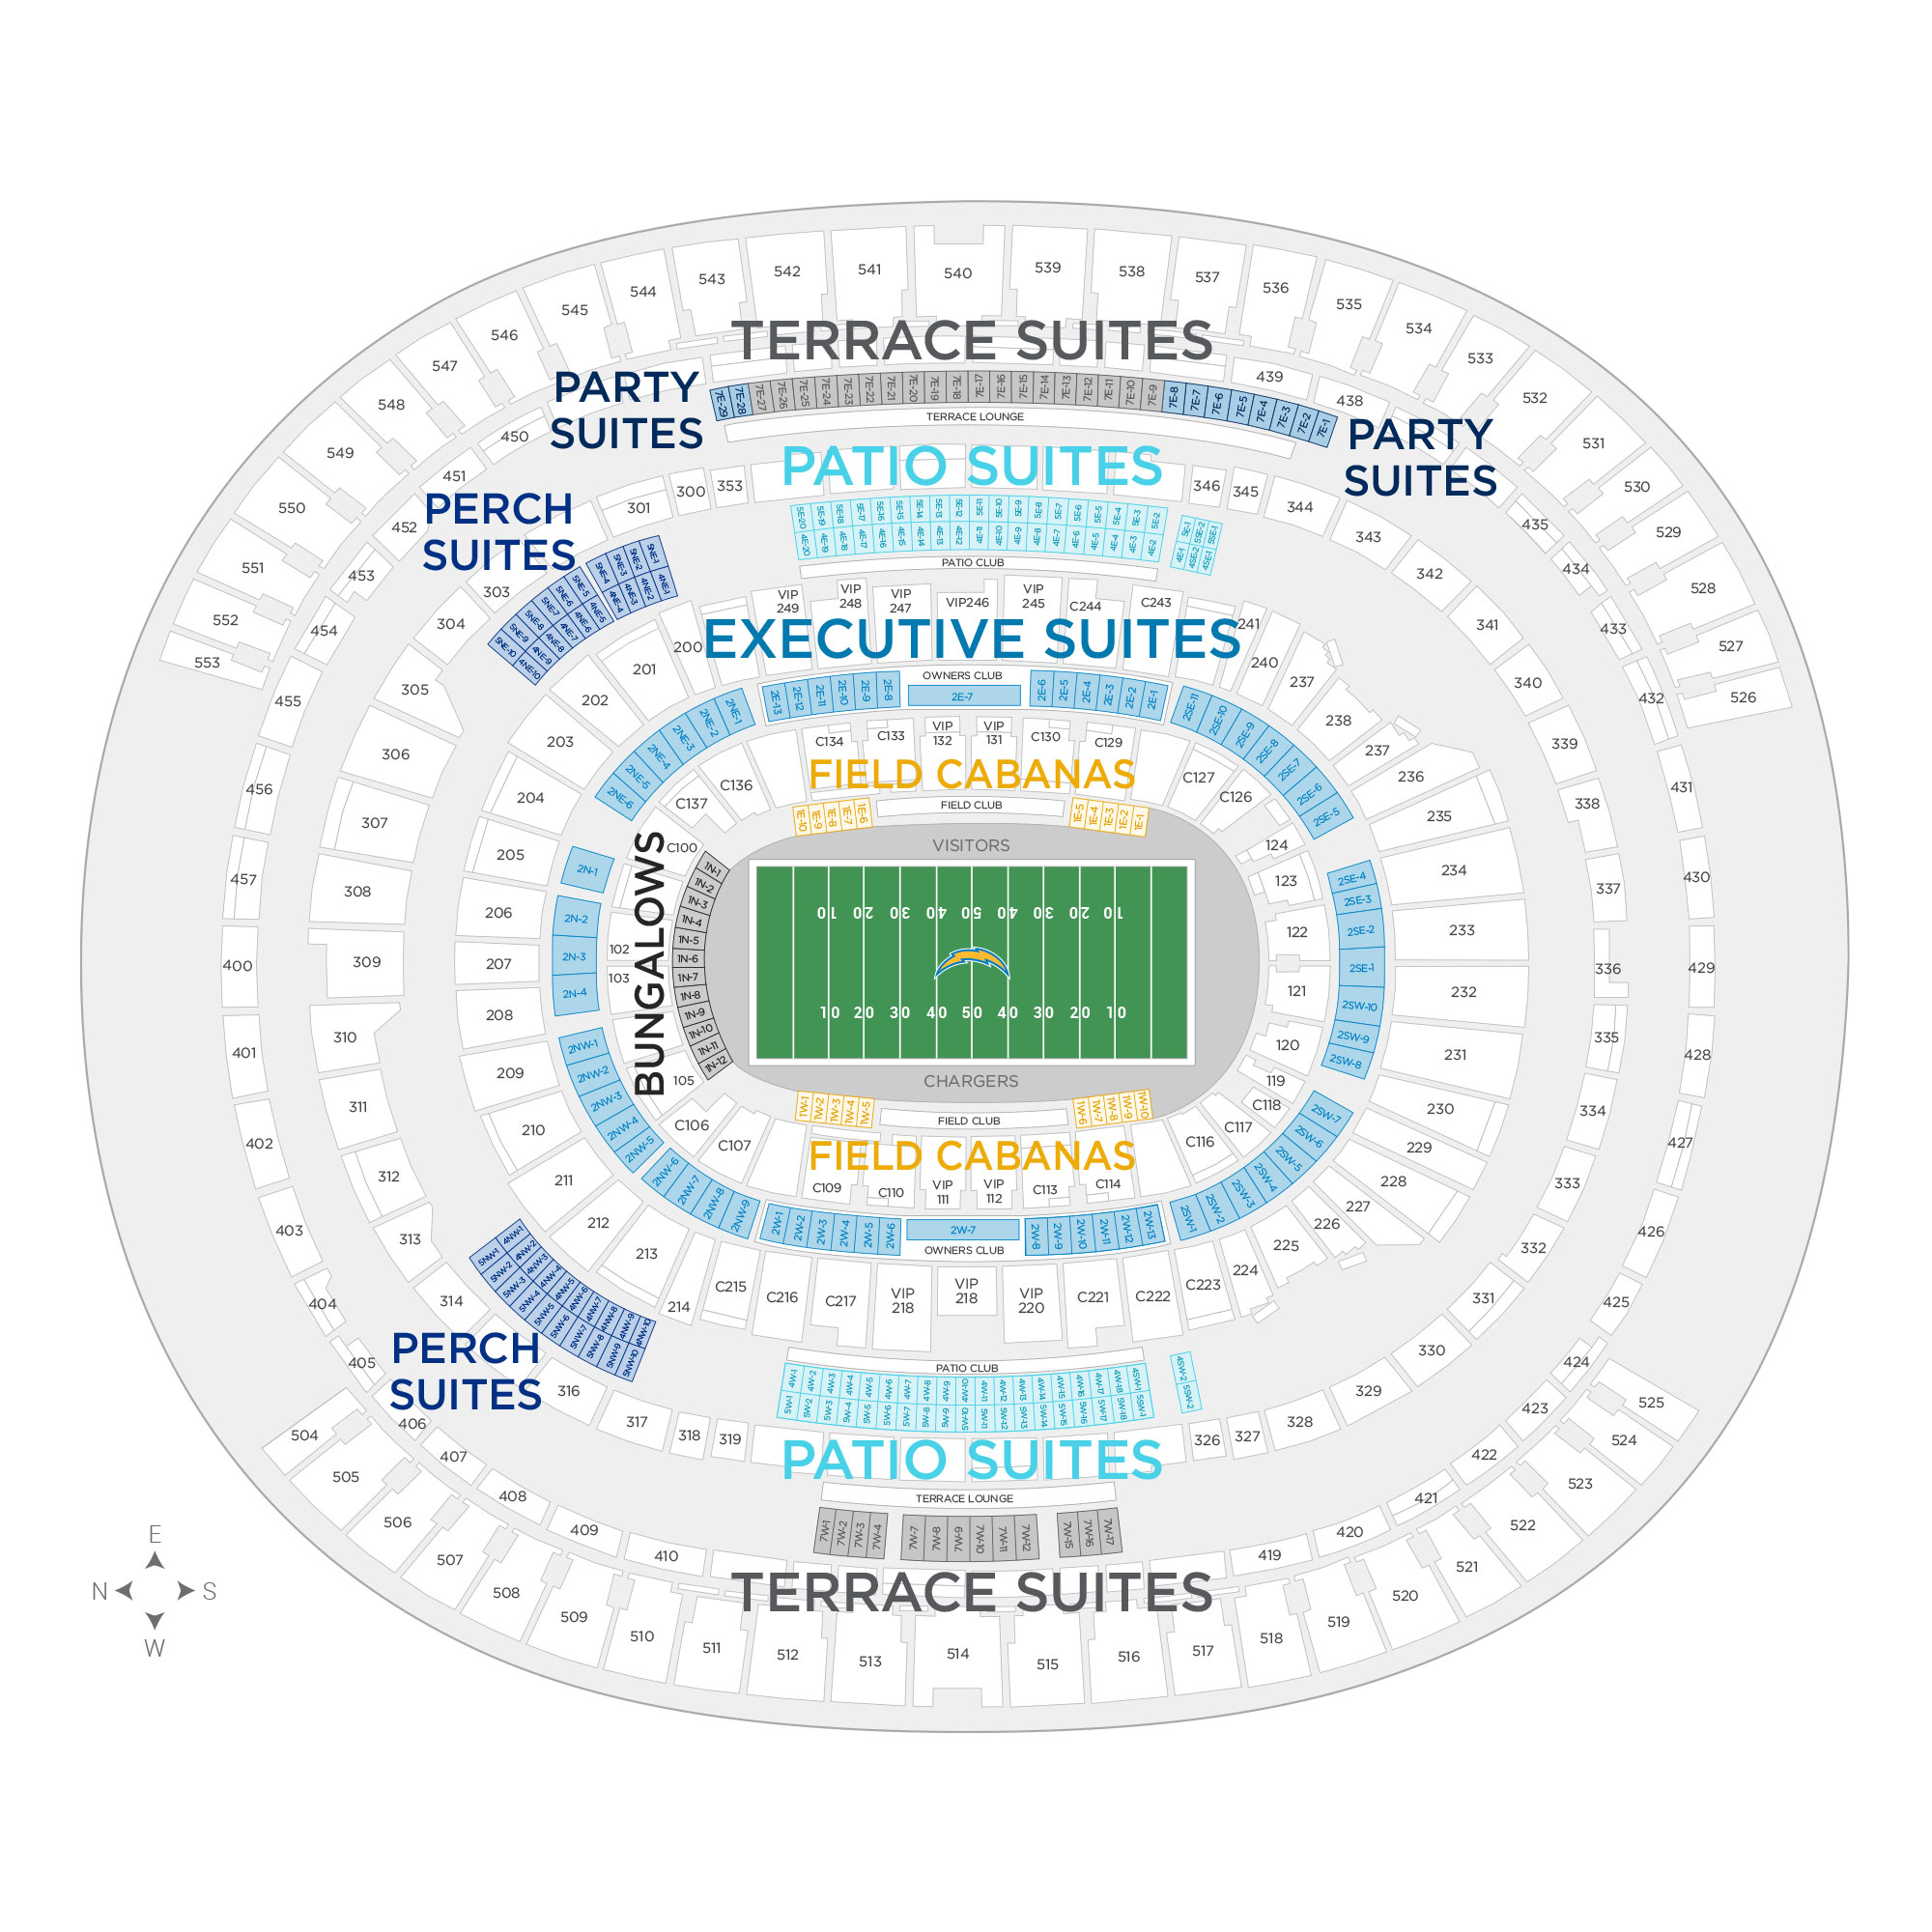 SoFi Stadium / Los Angeles Chargers Suite Map and Seating Chart